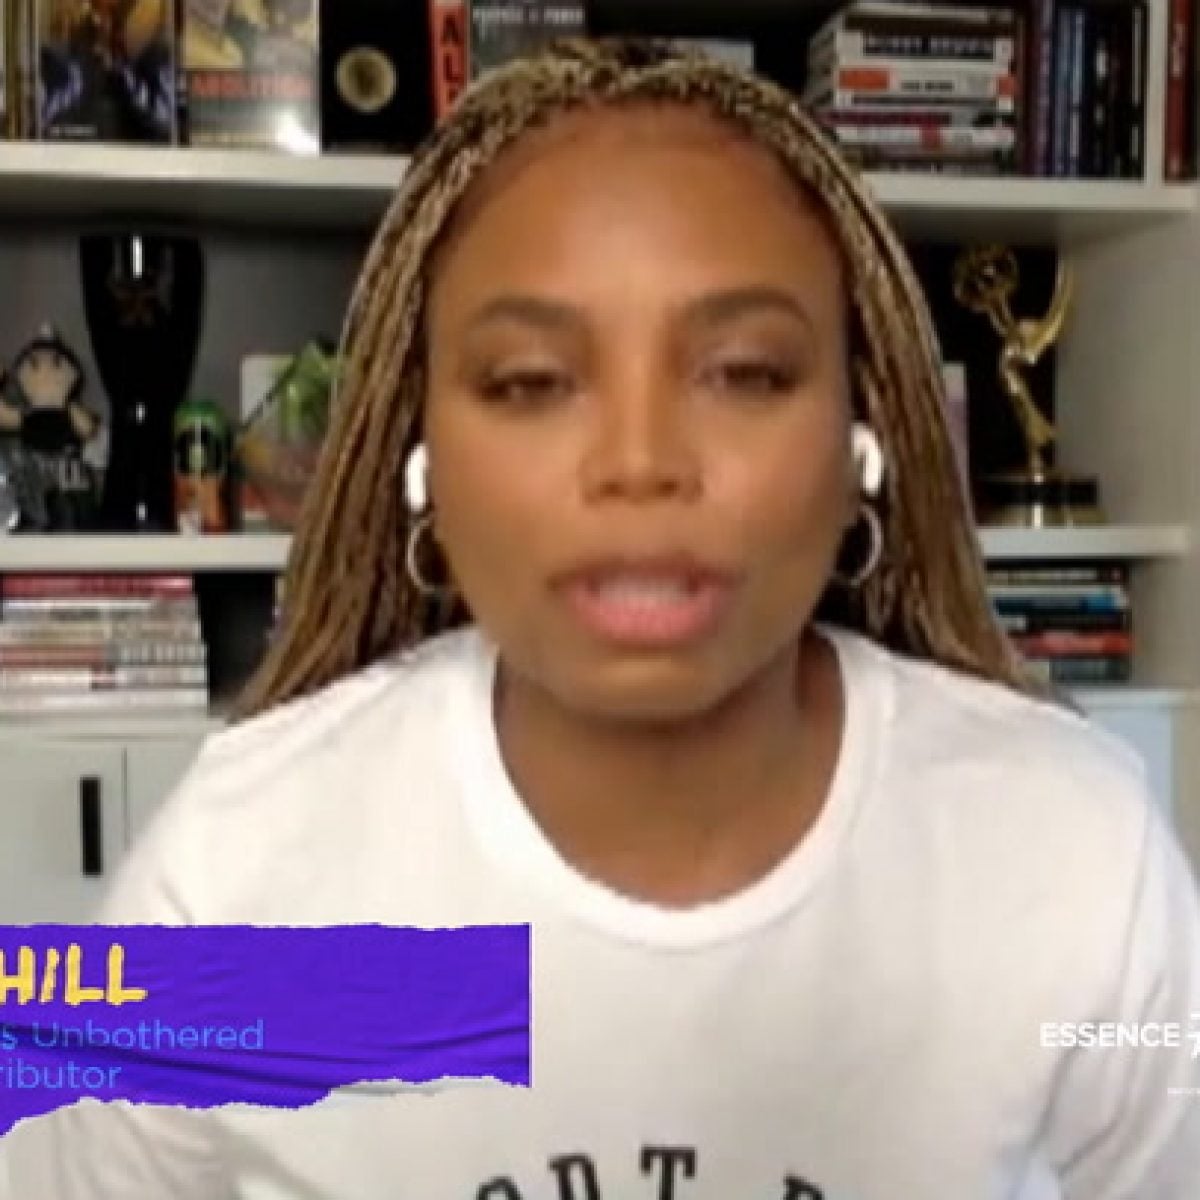 Good Trouble: A 1:1 With Jemele Hill & Tamika Mallory